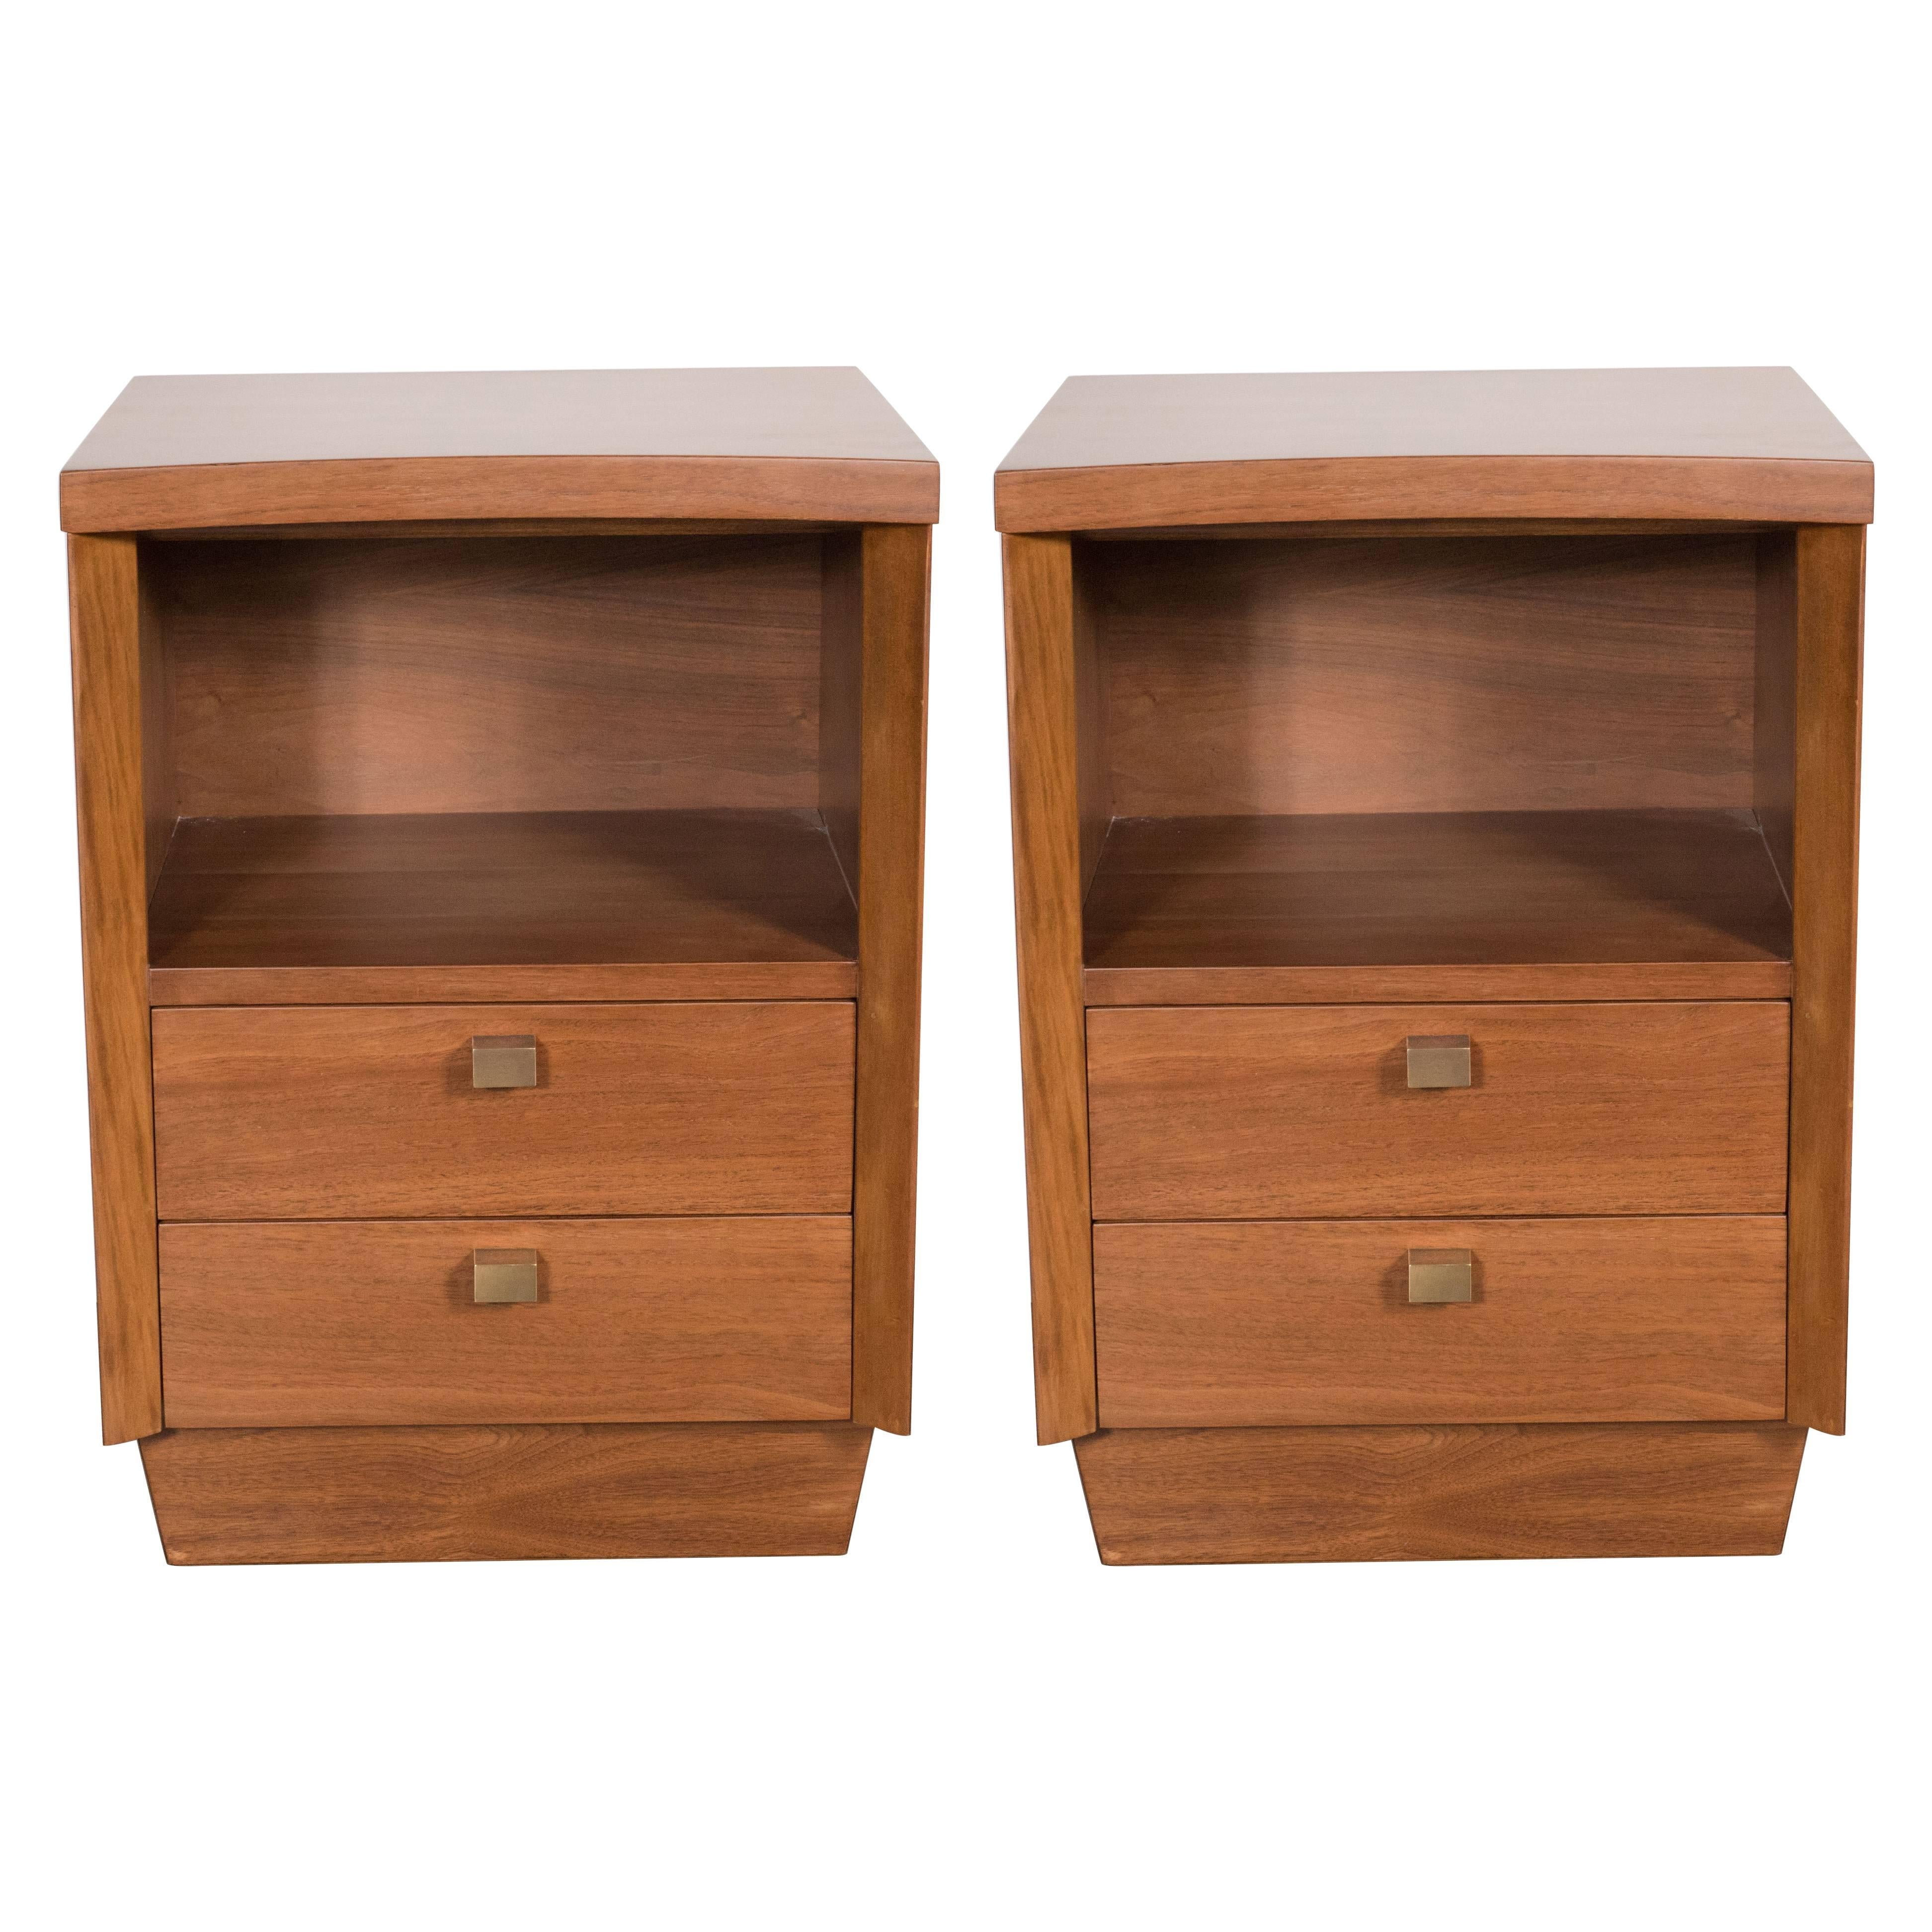 Mid-Century Modernist Bowed Front Nightstands in Rubbed Walnut with Brass Pulls